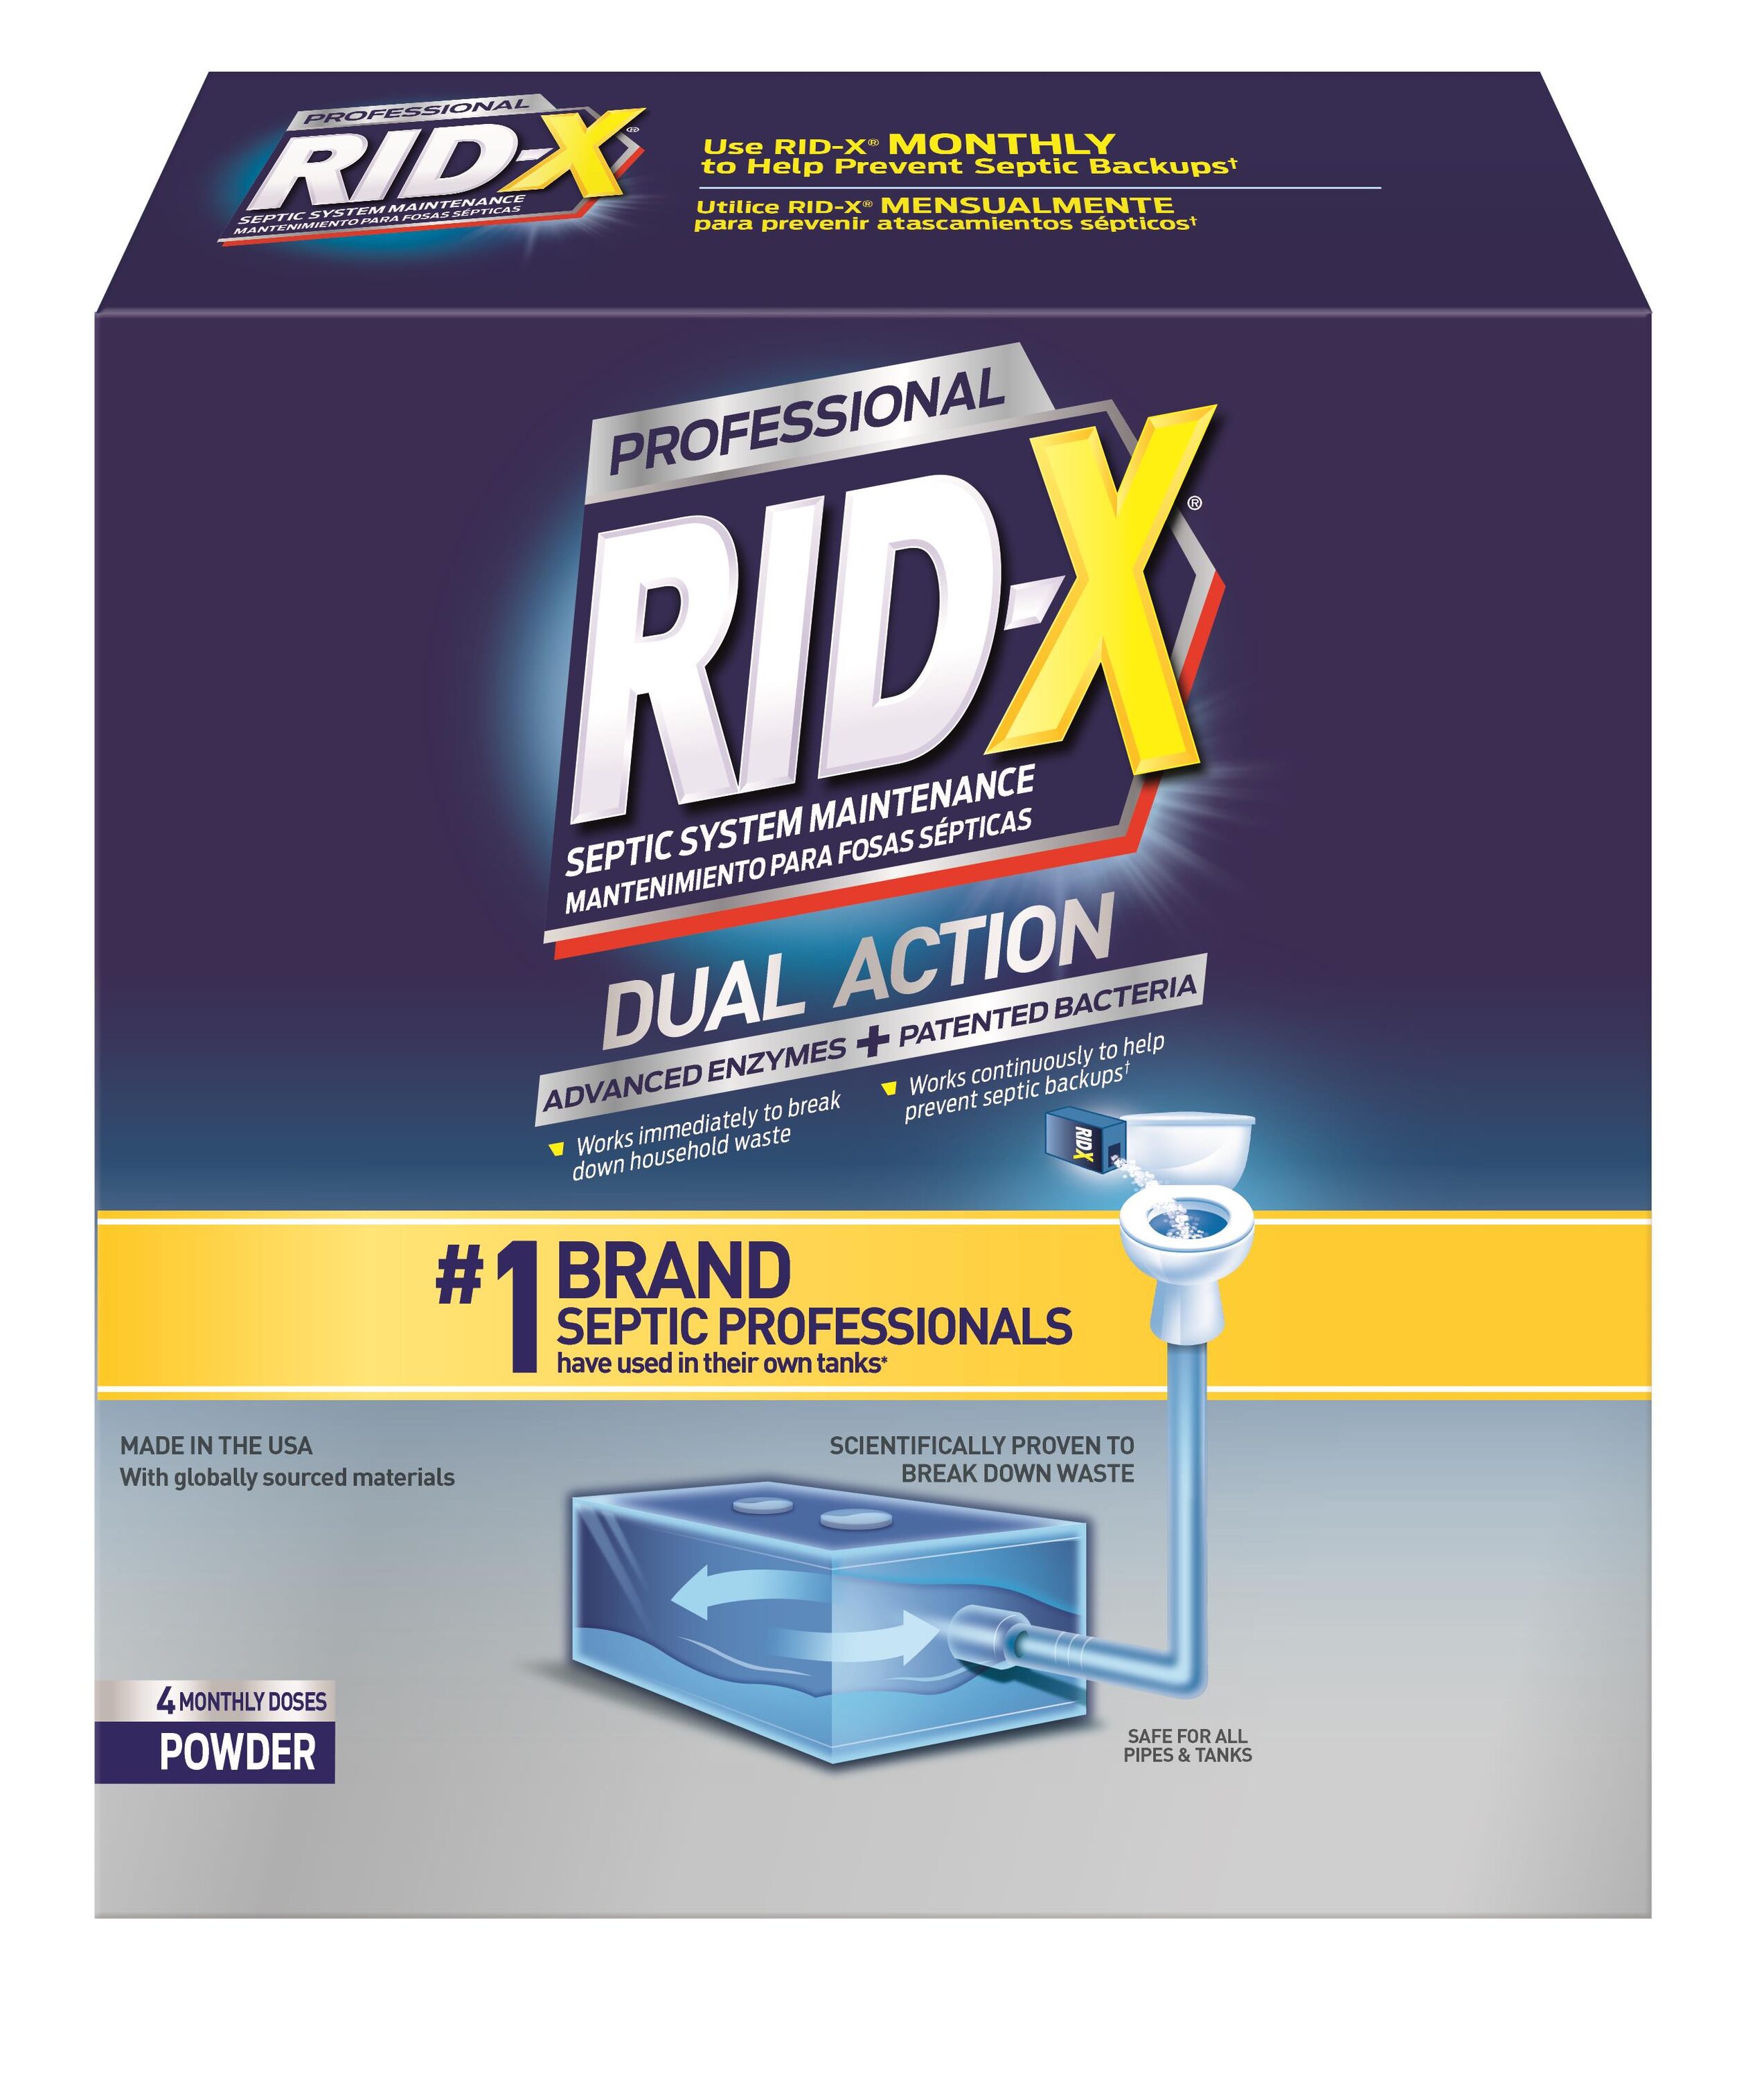 Pros And Cons of Rid-X  